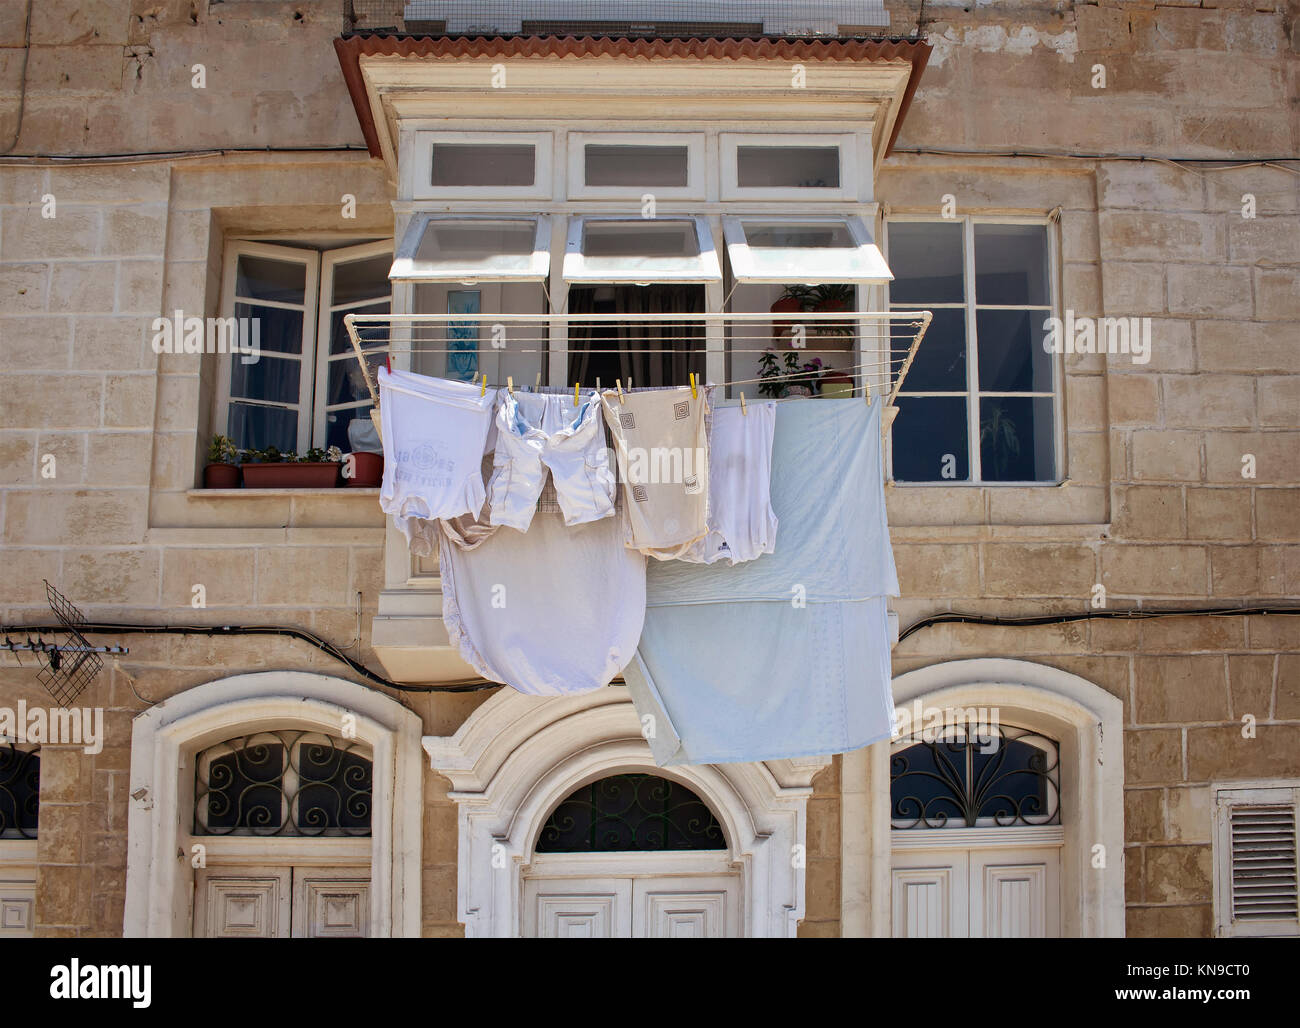 View of a historical, typical Valletta building in Malta. Hanging out clothes outside to dry reflects region's culture and lifestyle. Stock Photo